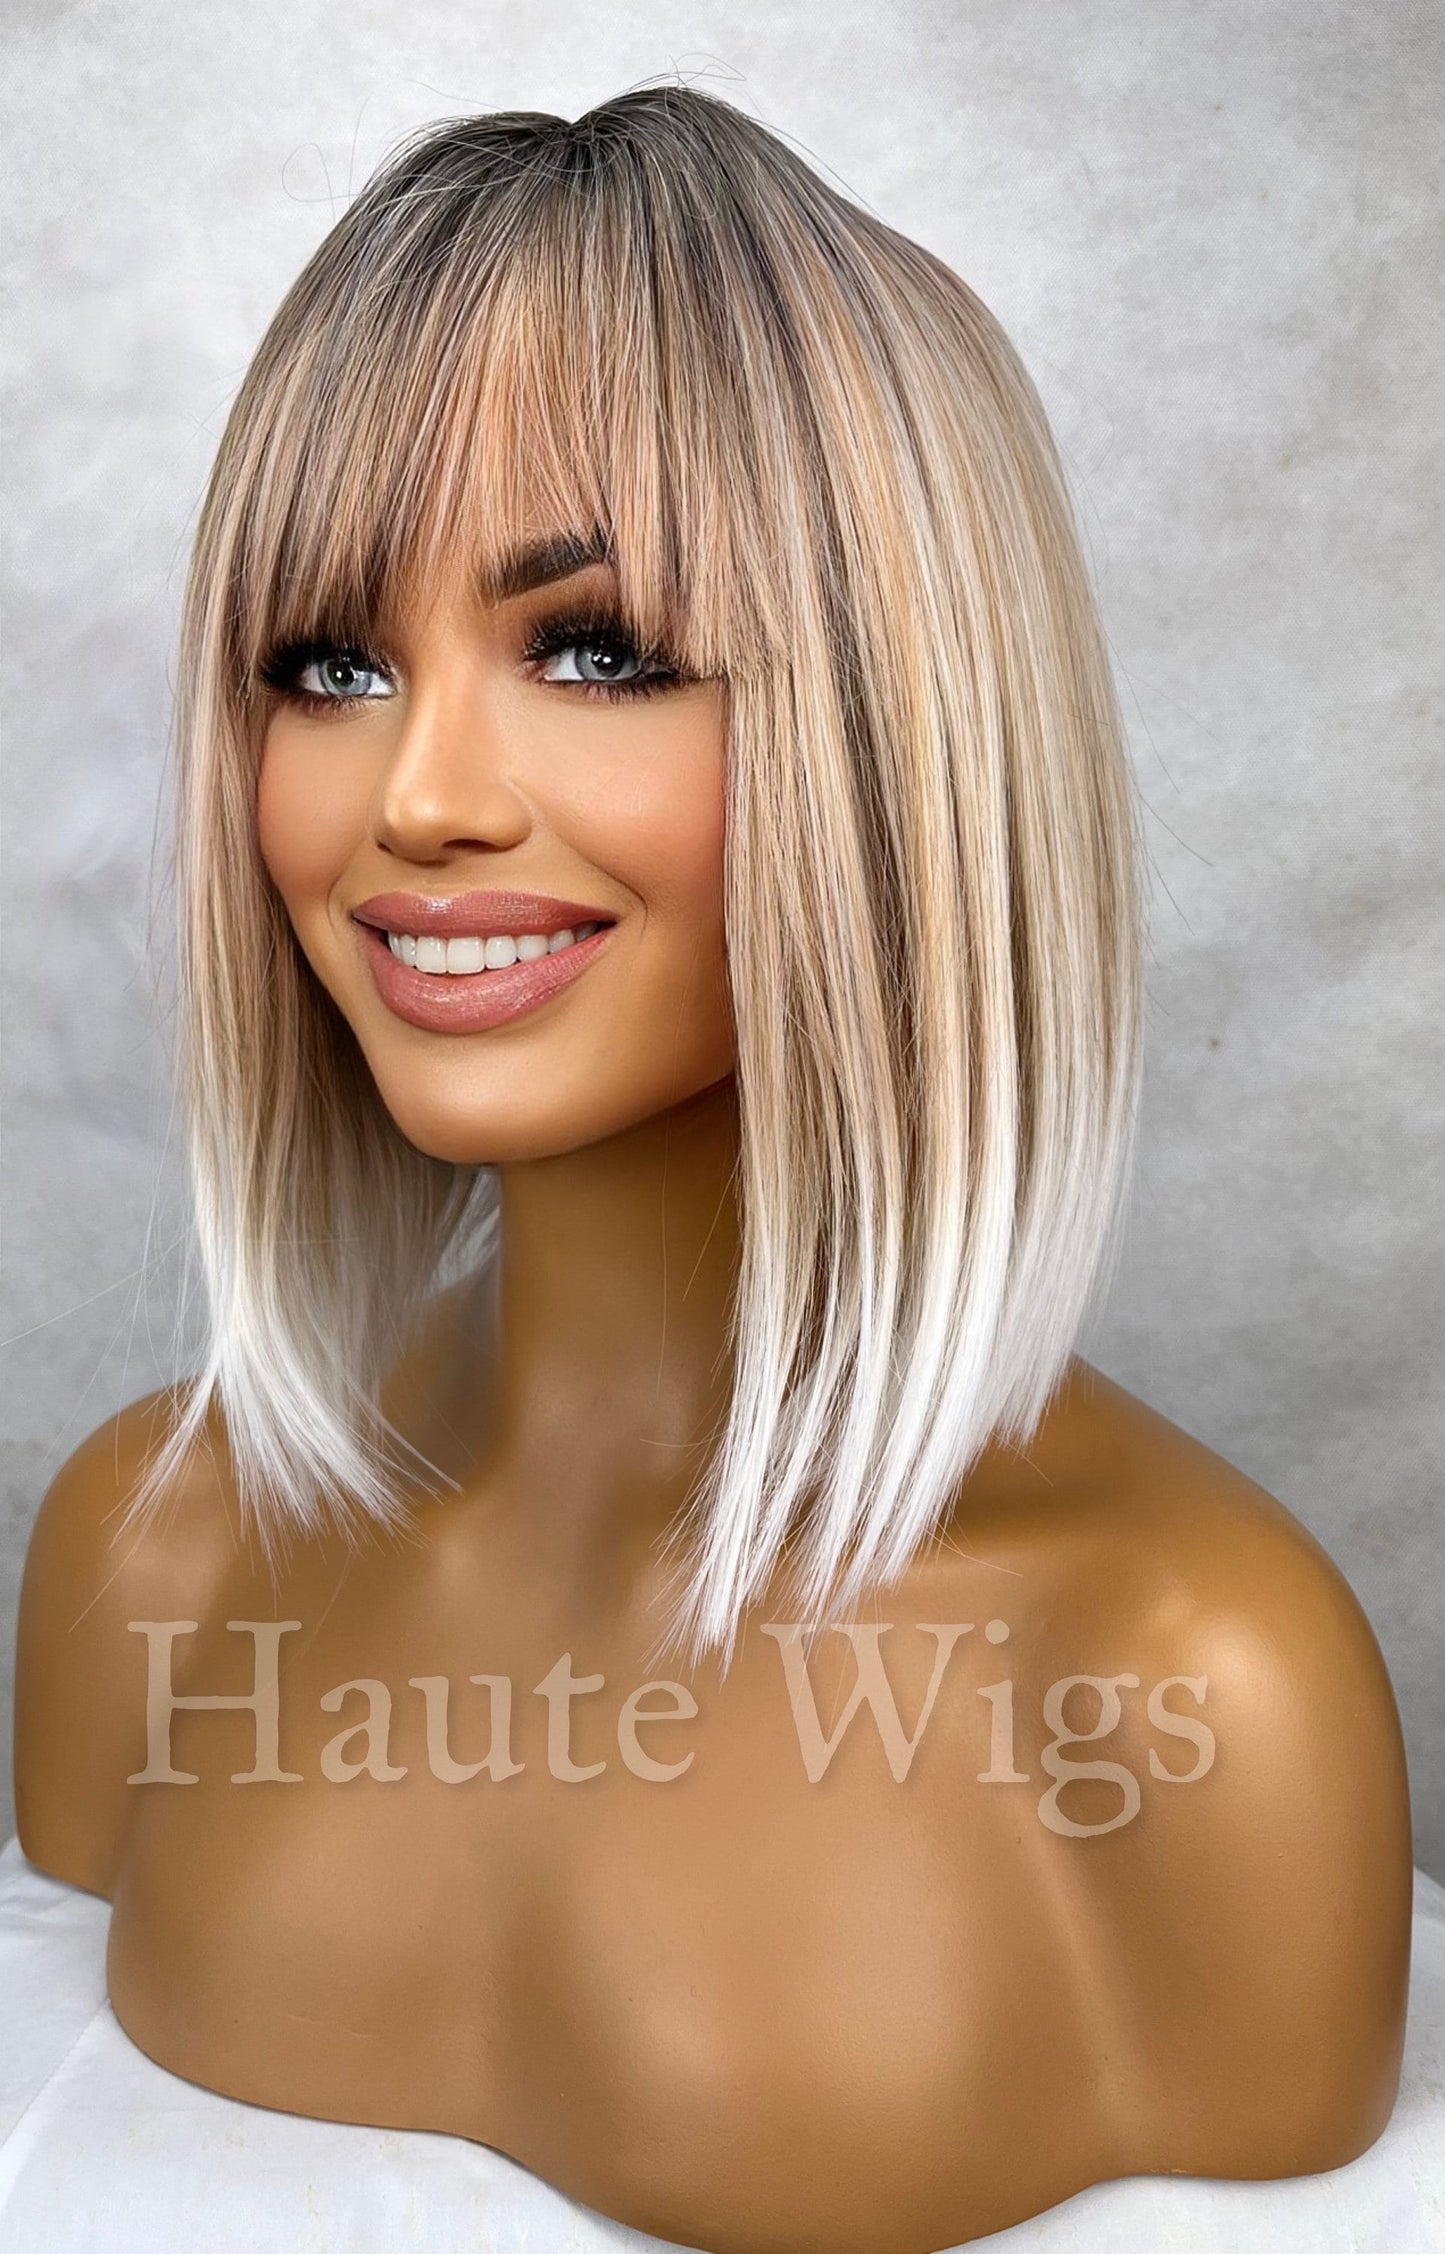 Chic - Short Ash Blonde White Ends Balayage Highlights BOB streaks 12 inch Wig Straight Center Parting Low Density bangs fringe Haute wigs